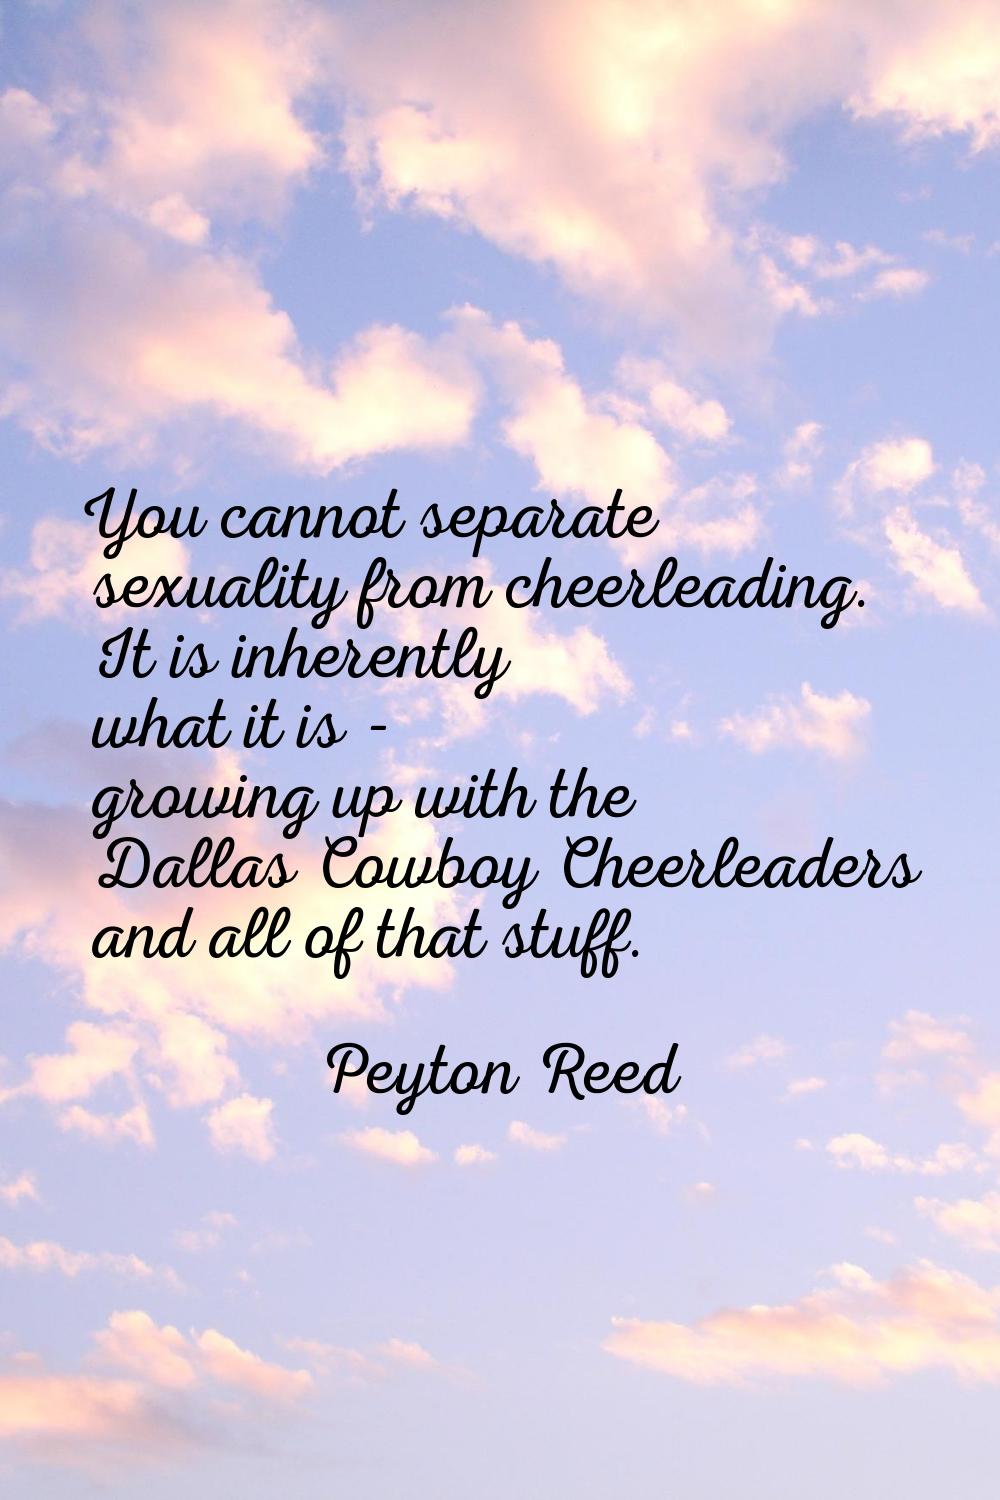 You cannot separate sexuality from cheerleading. It is inherently what it is - growing up with the 